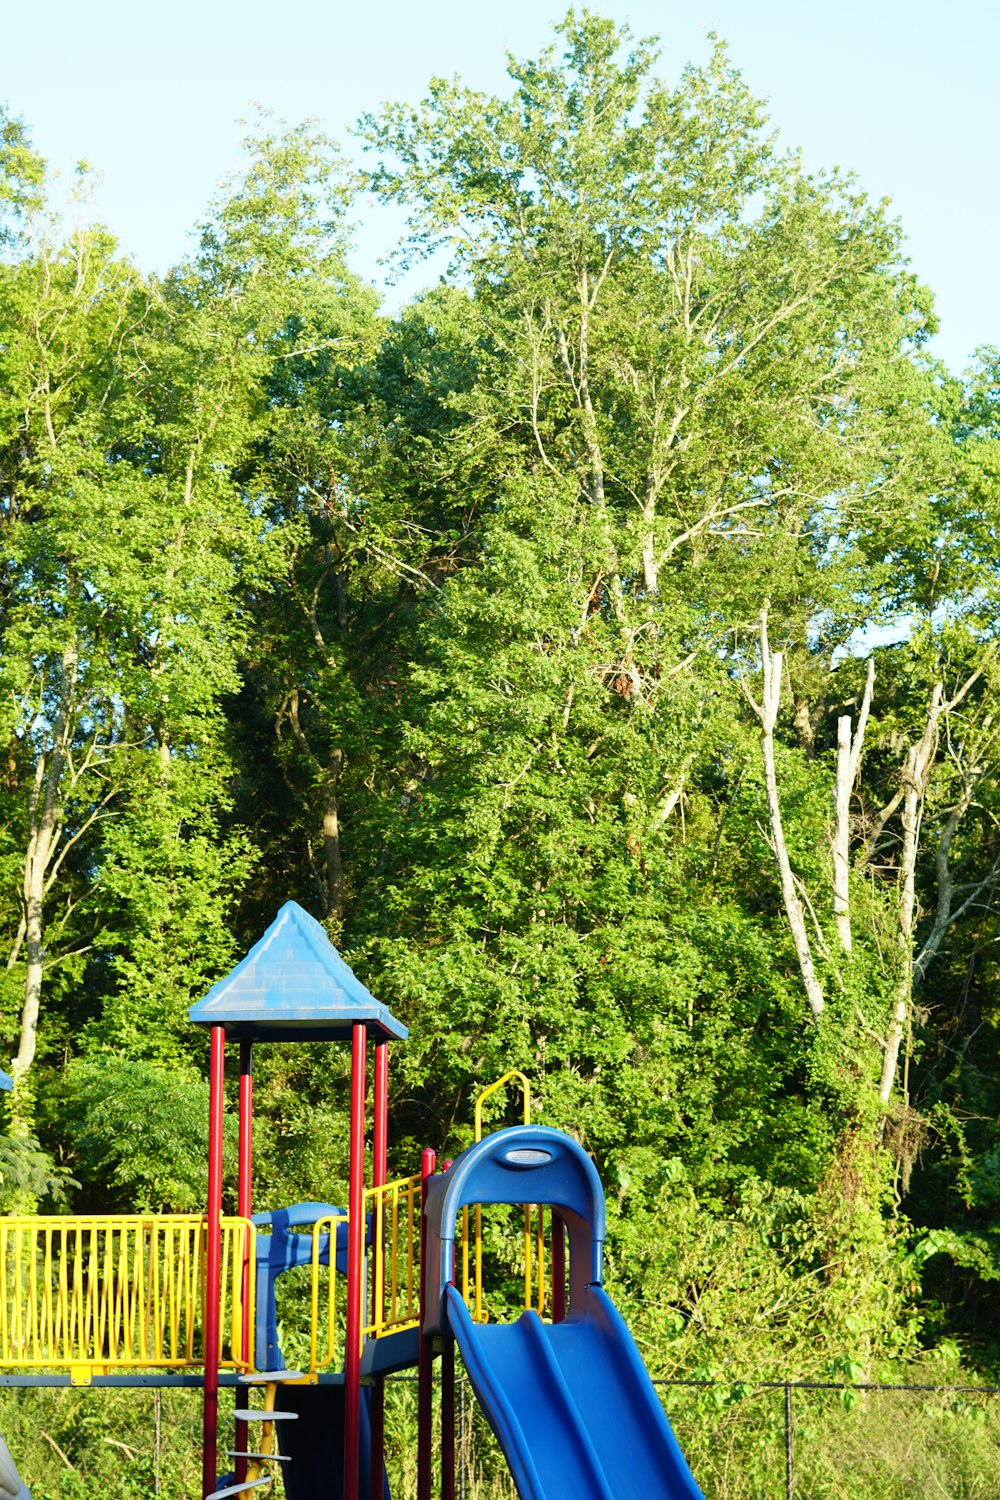 a playground with a blue slide and trees in the background